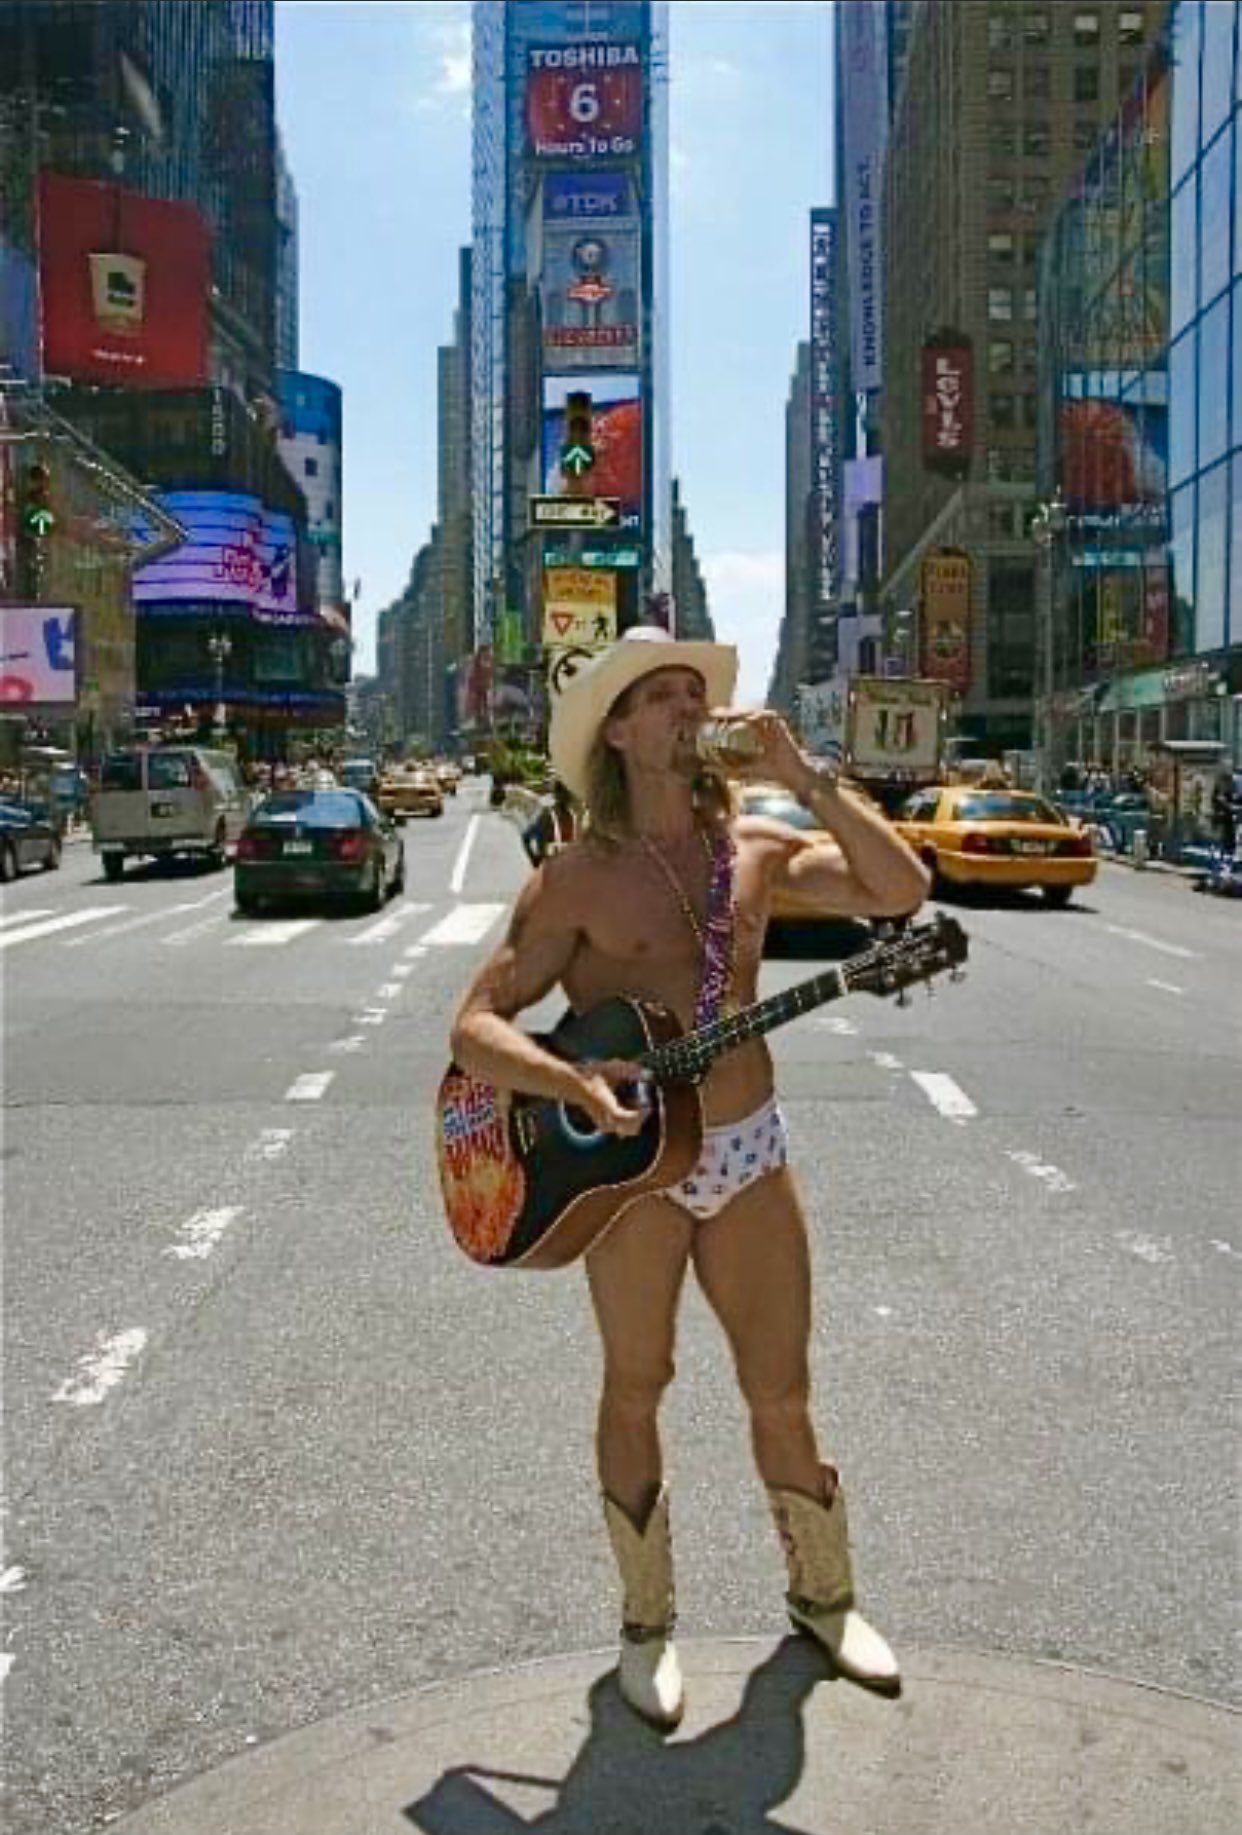 Can t let the day pass without wishing a Happy 50th Birthday to Robert Burck, aka The Naked Cowboy ... 